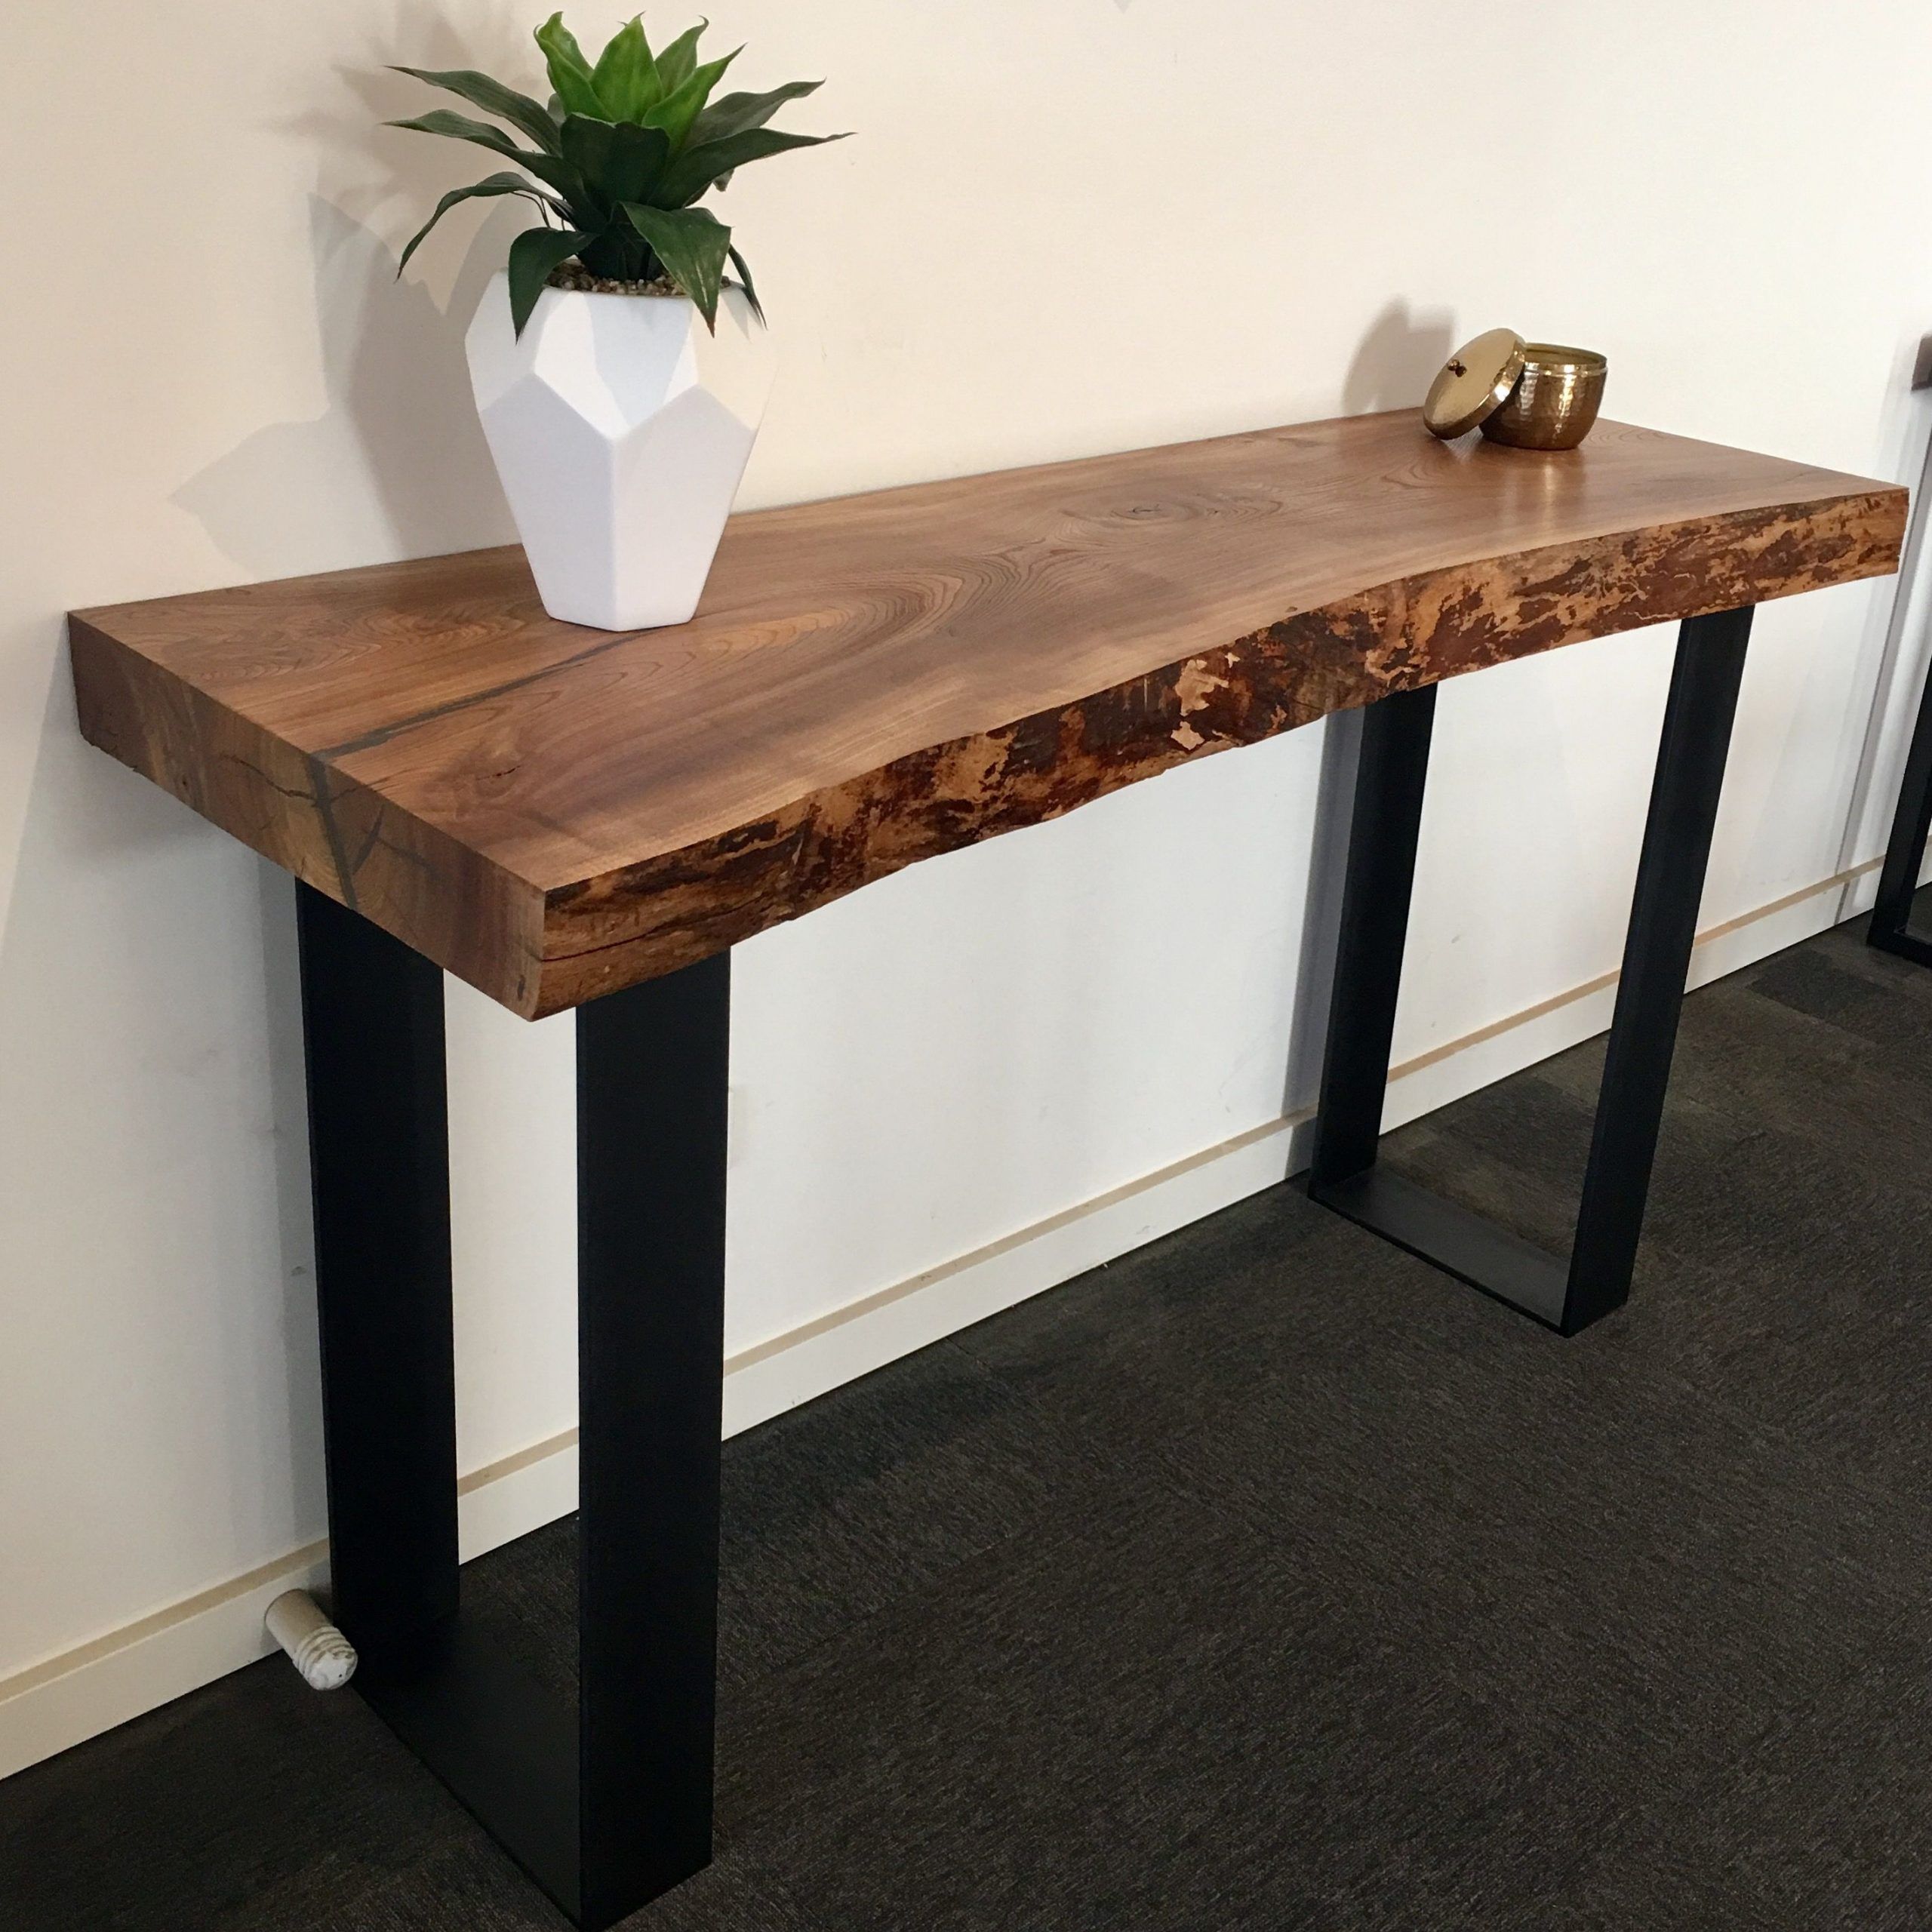 Recycled Elm Slab Hall Table With Black Flat Bar Metal Legs | Entry With Regard To Matte Black Metal Desks (View 15 of 15)